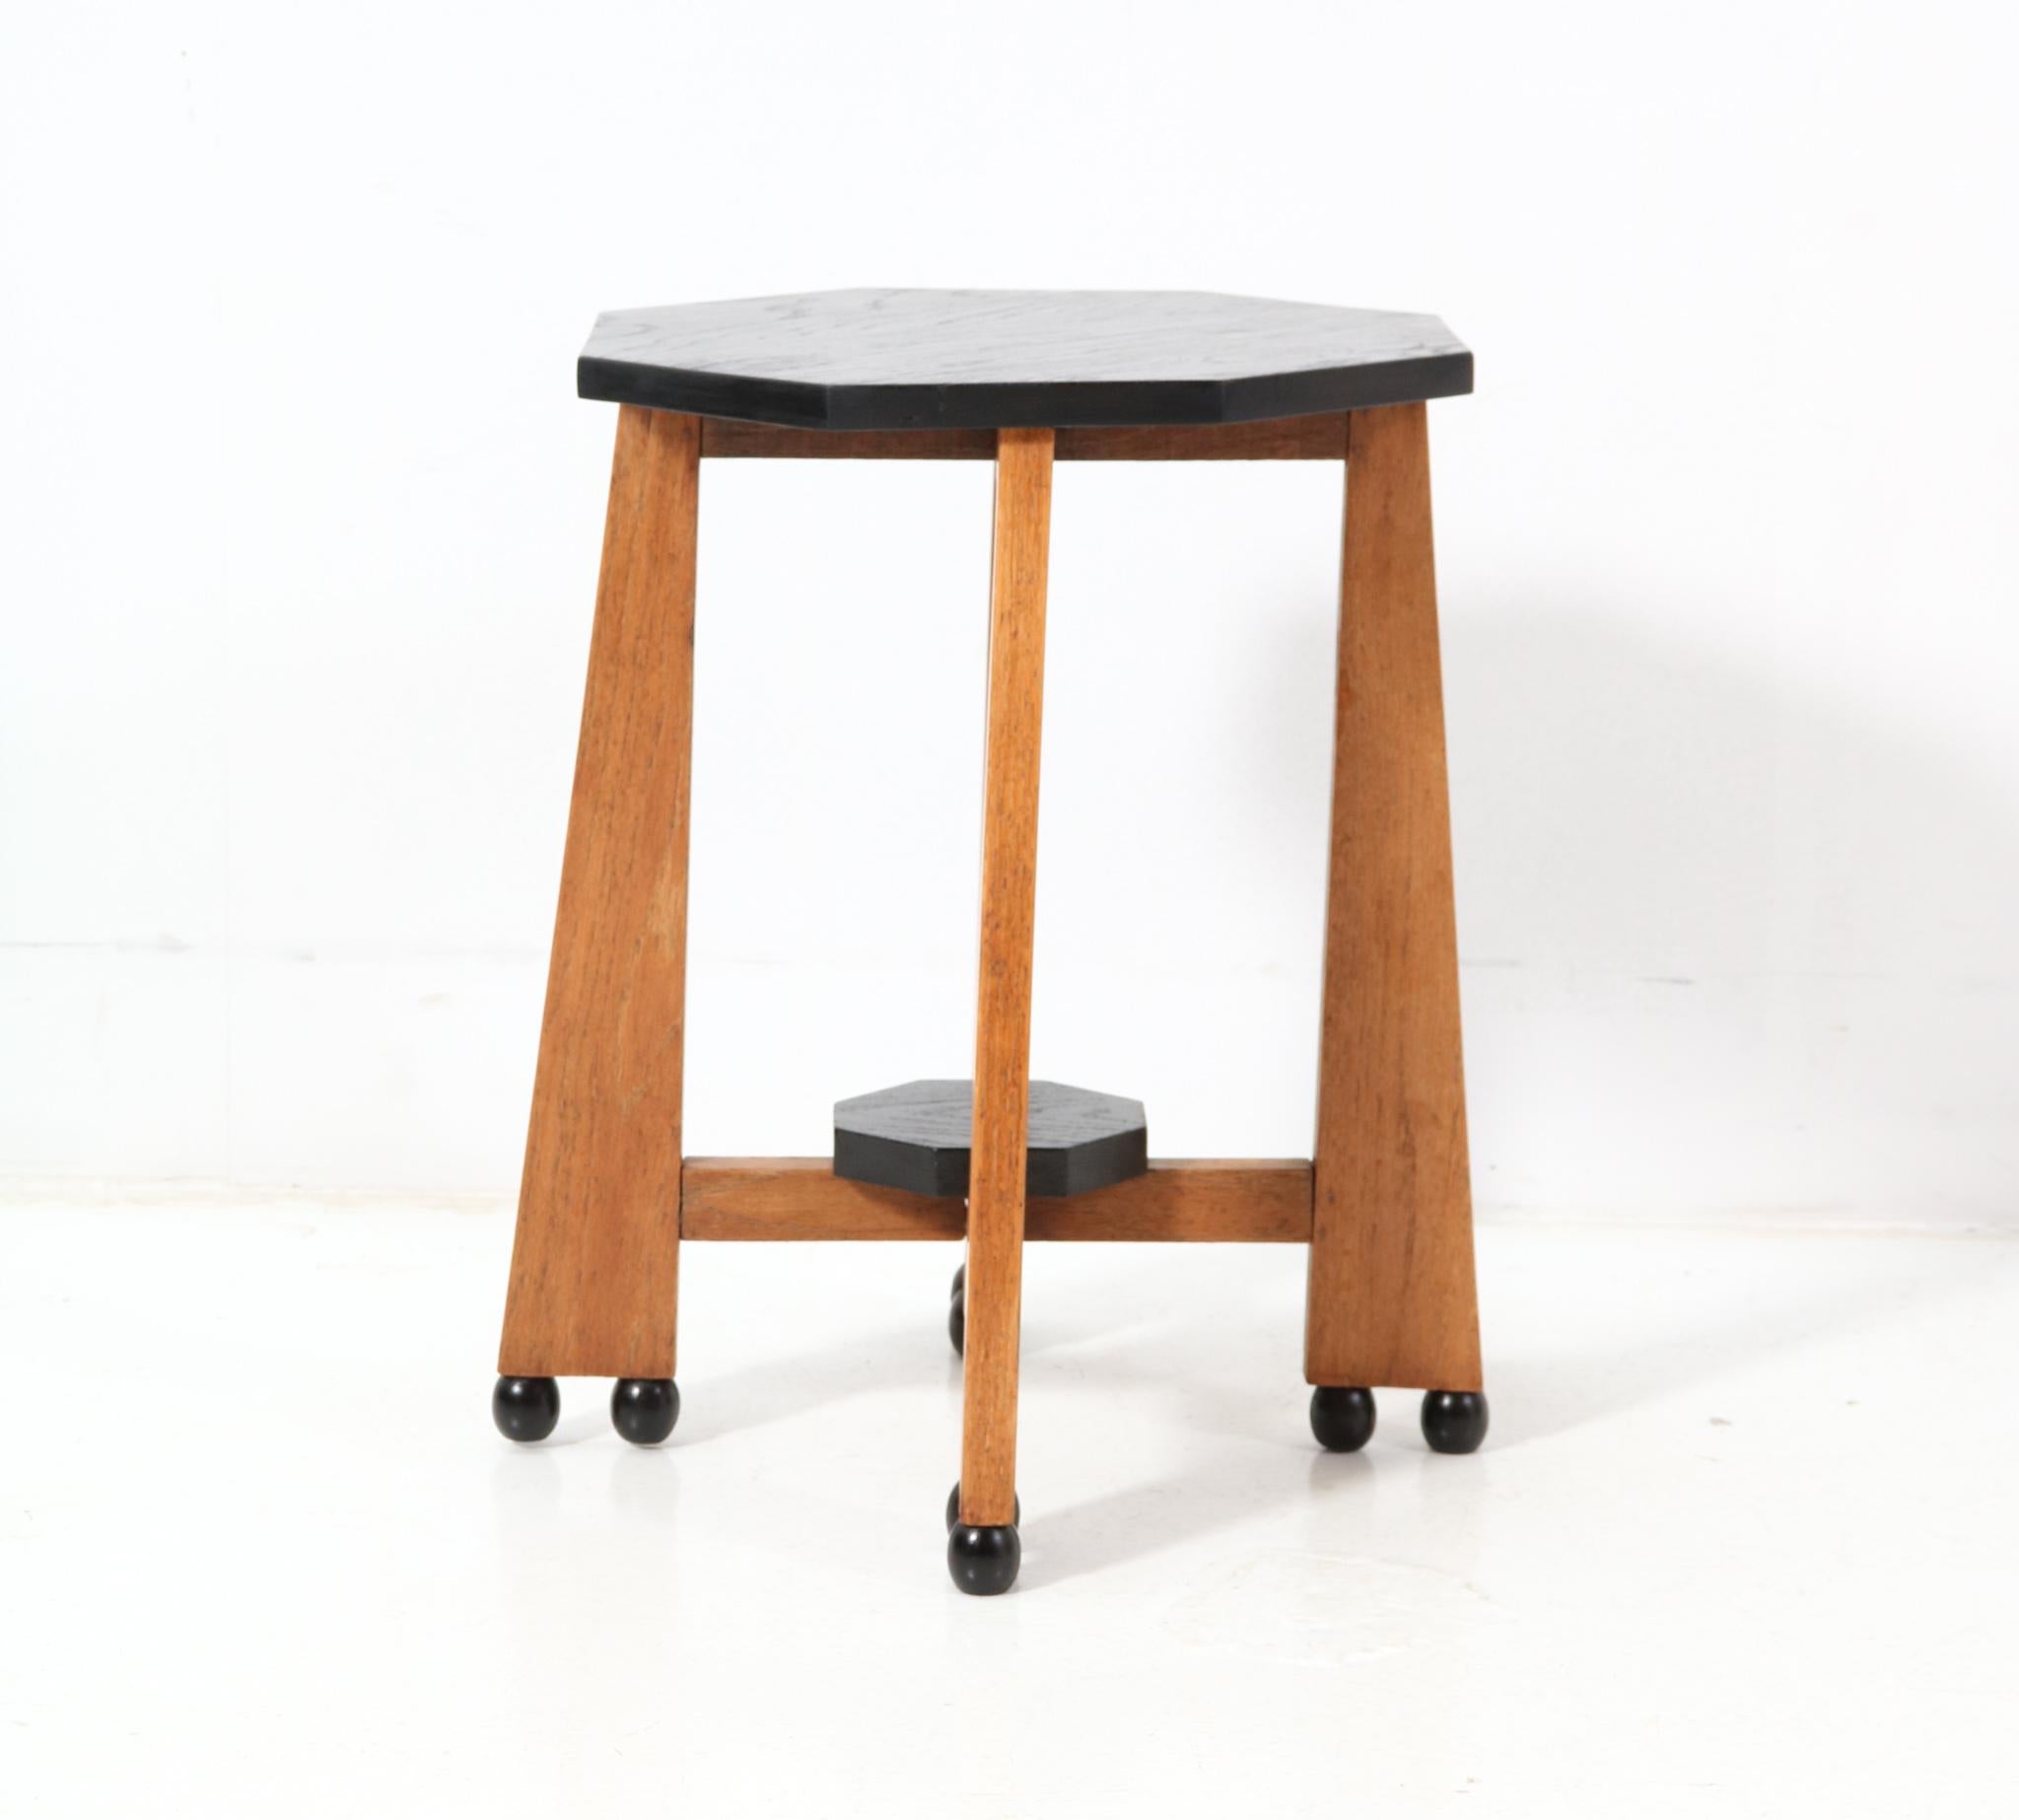 Stunning and rare Art Deco Amsterdamse school side table.
Striking Dutch design from the 1920s.
Solid oak with original black lacquered wooden tops.
This wonderful Art Deco Amsterdamse School side table is in very good condition with minor wear